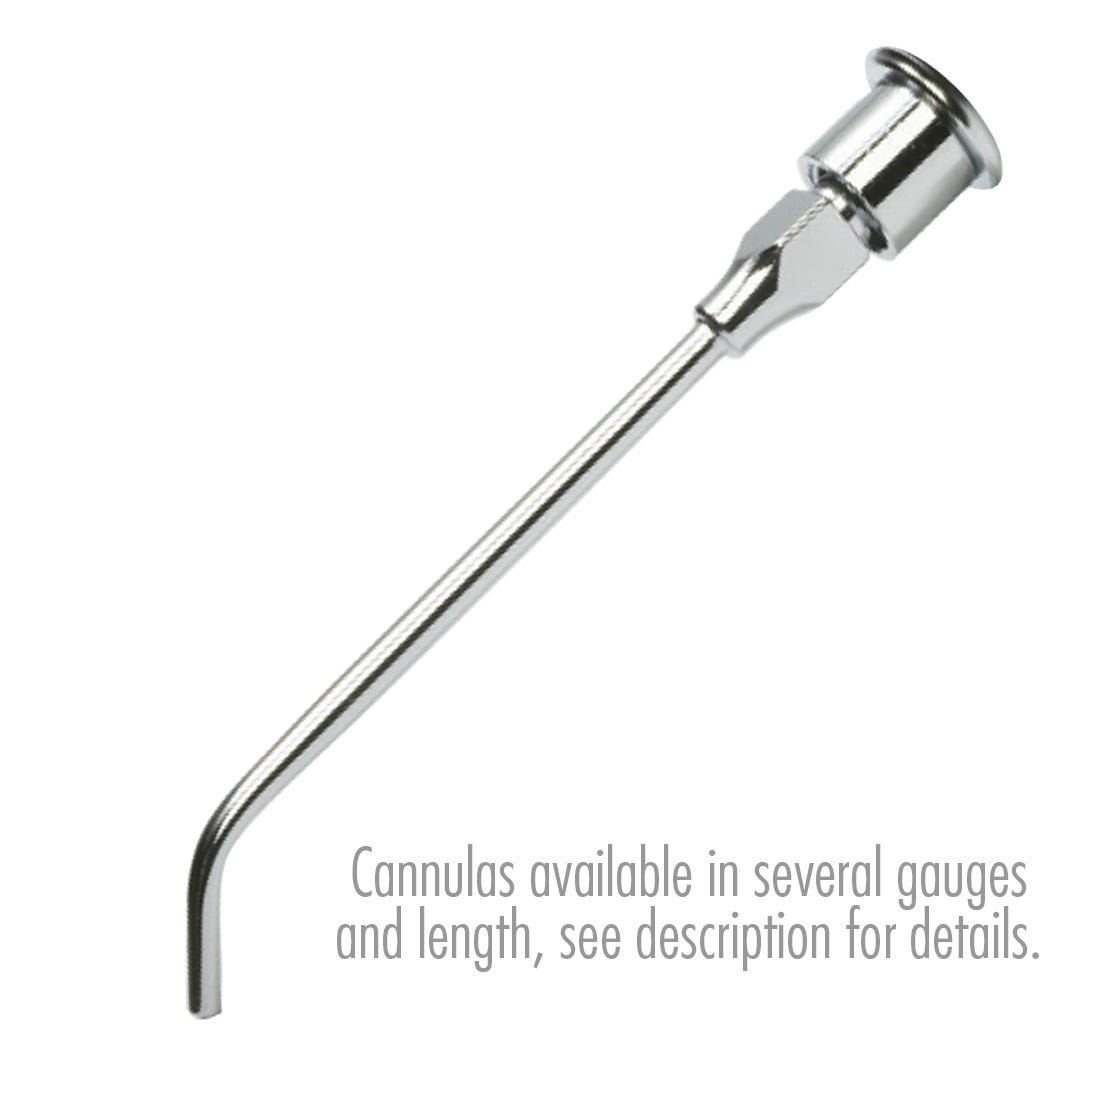 ACE Irrigation Cannula - Stainless Steel 18G x 2", 45 degree angle